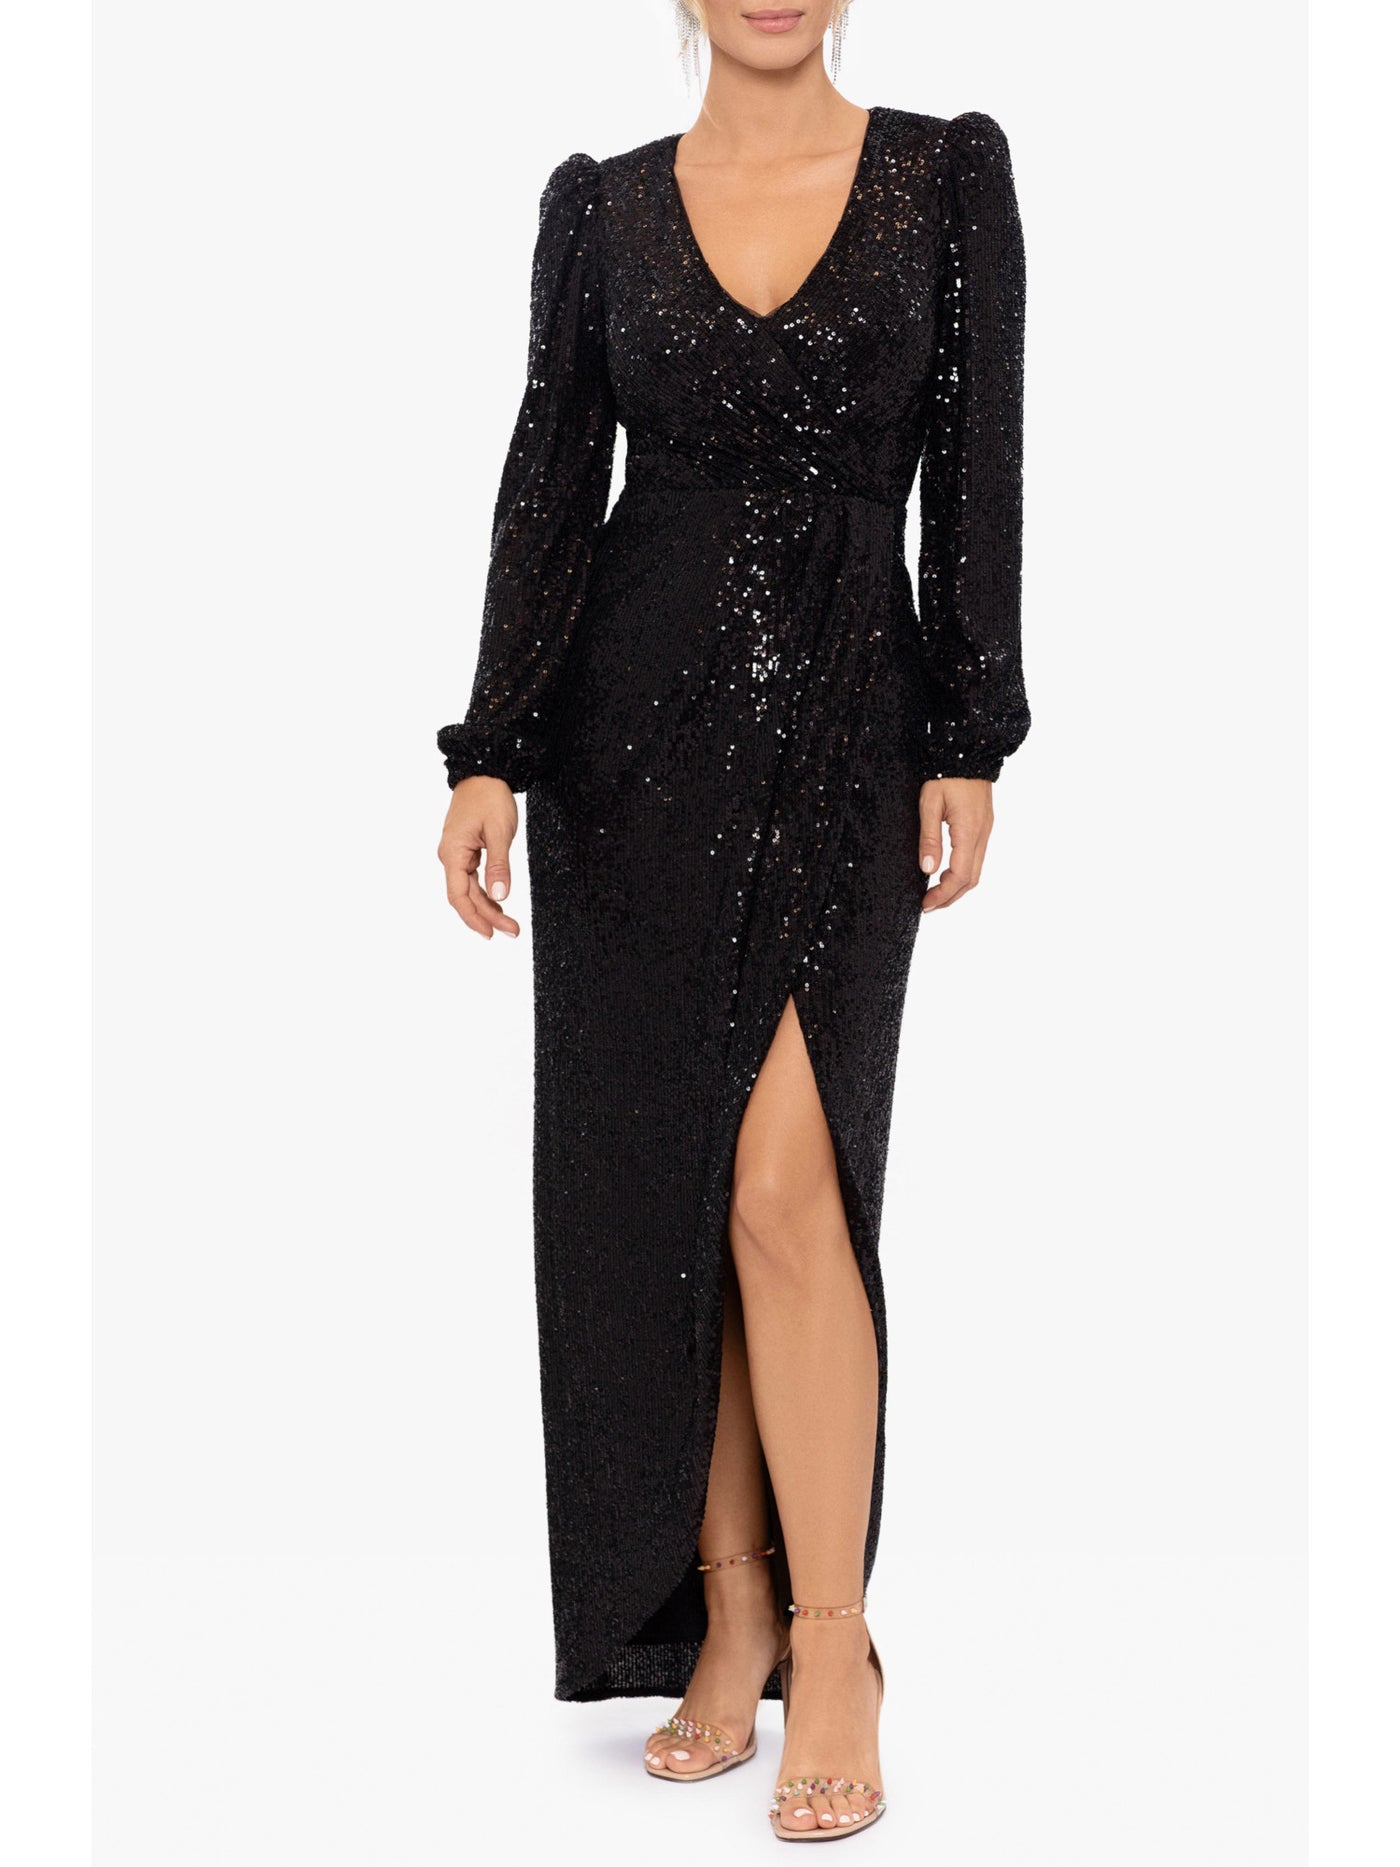 XSCAPE Womens Black Stretch Sequined Zippered Front Slit Lined Sheer Long Sleeve Surplice Neckline Full-Length Formal Gown Dress 4